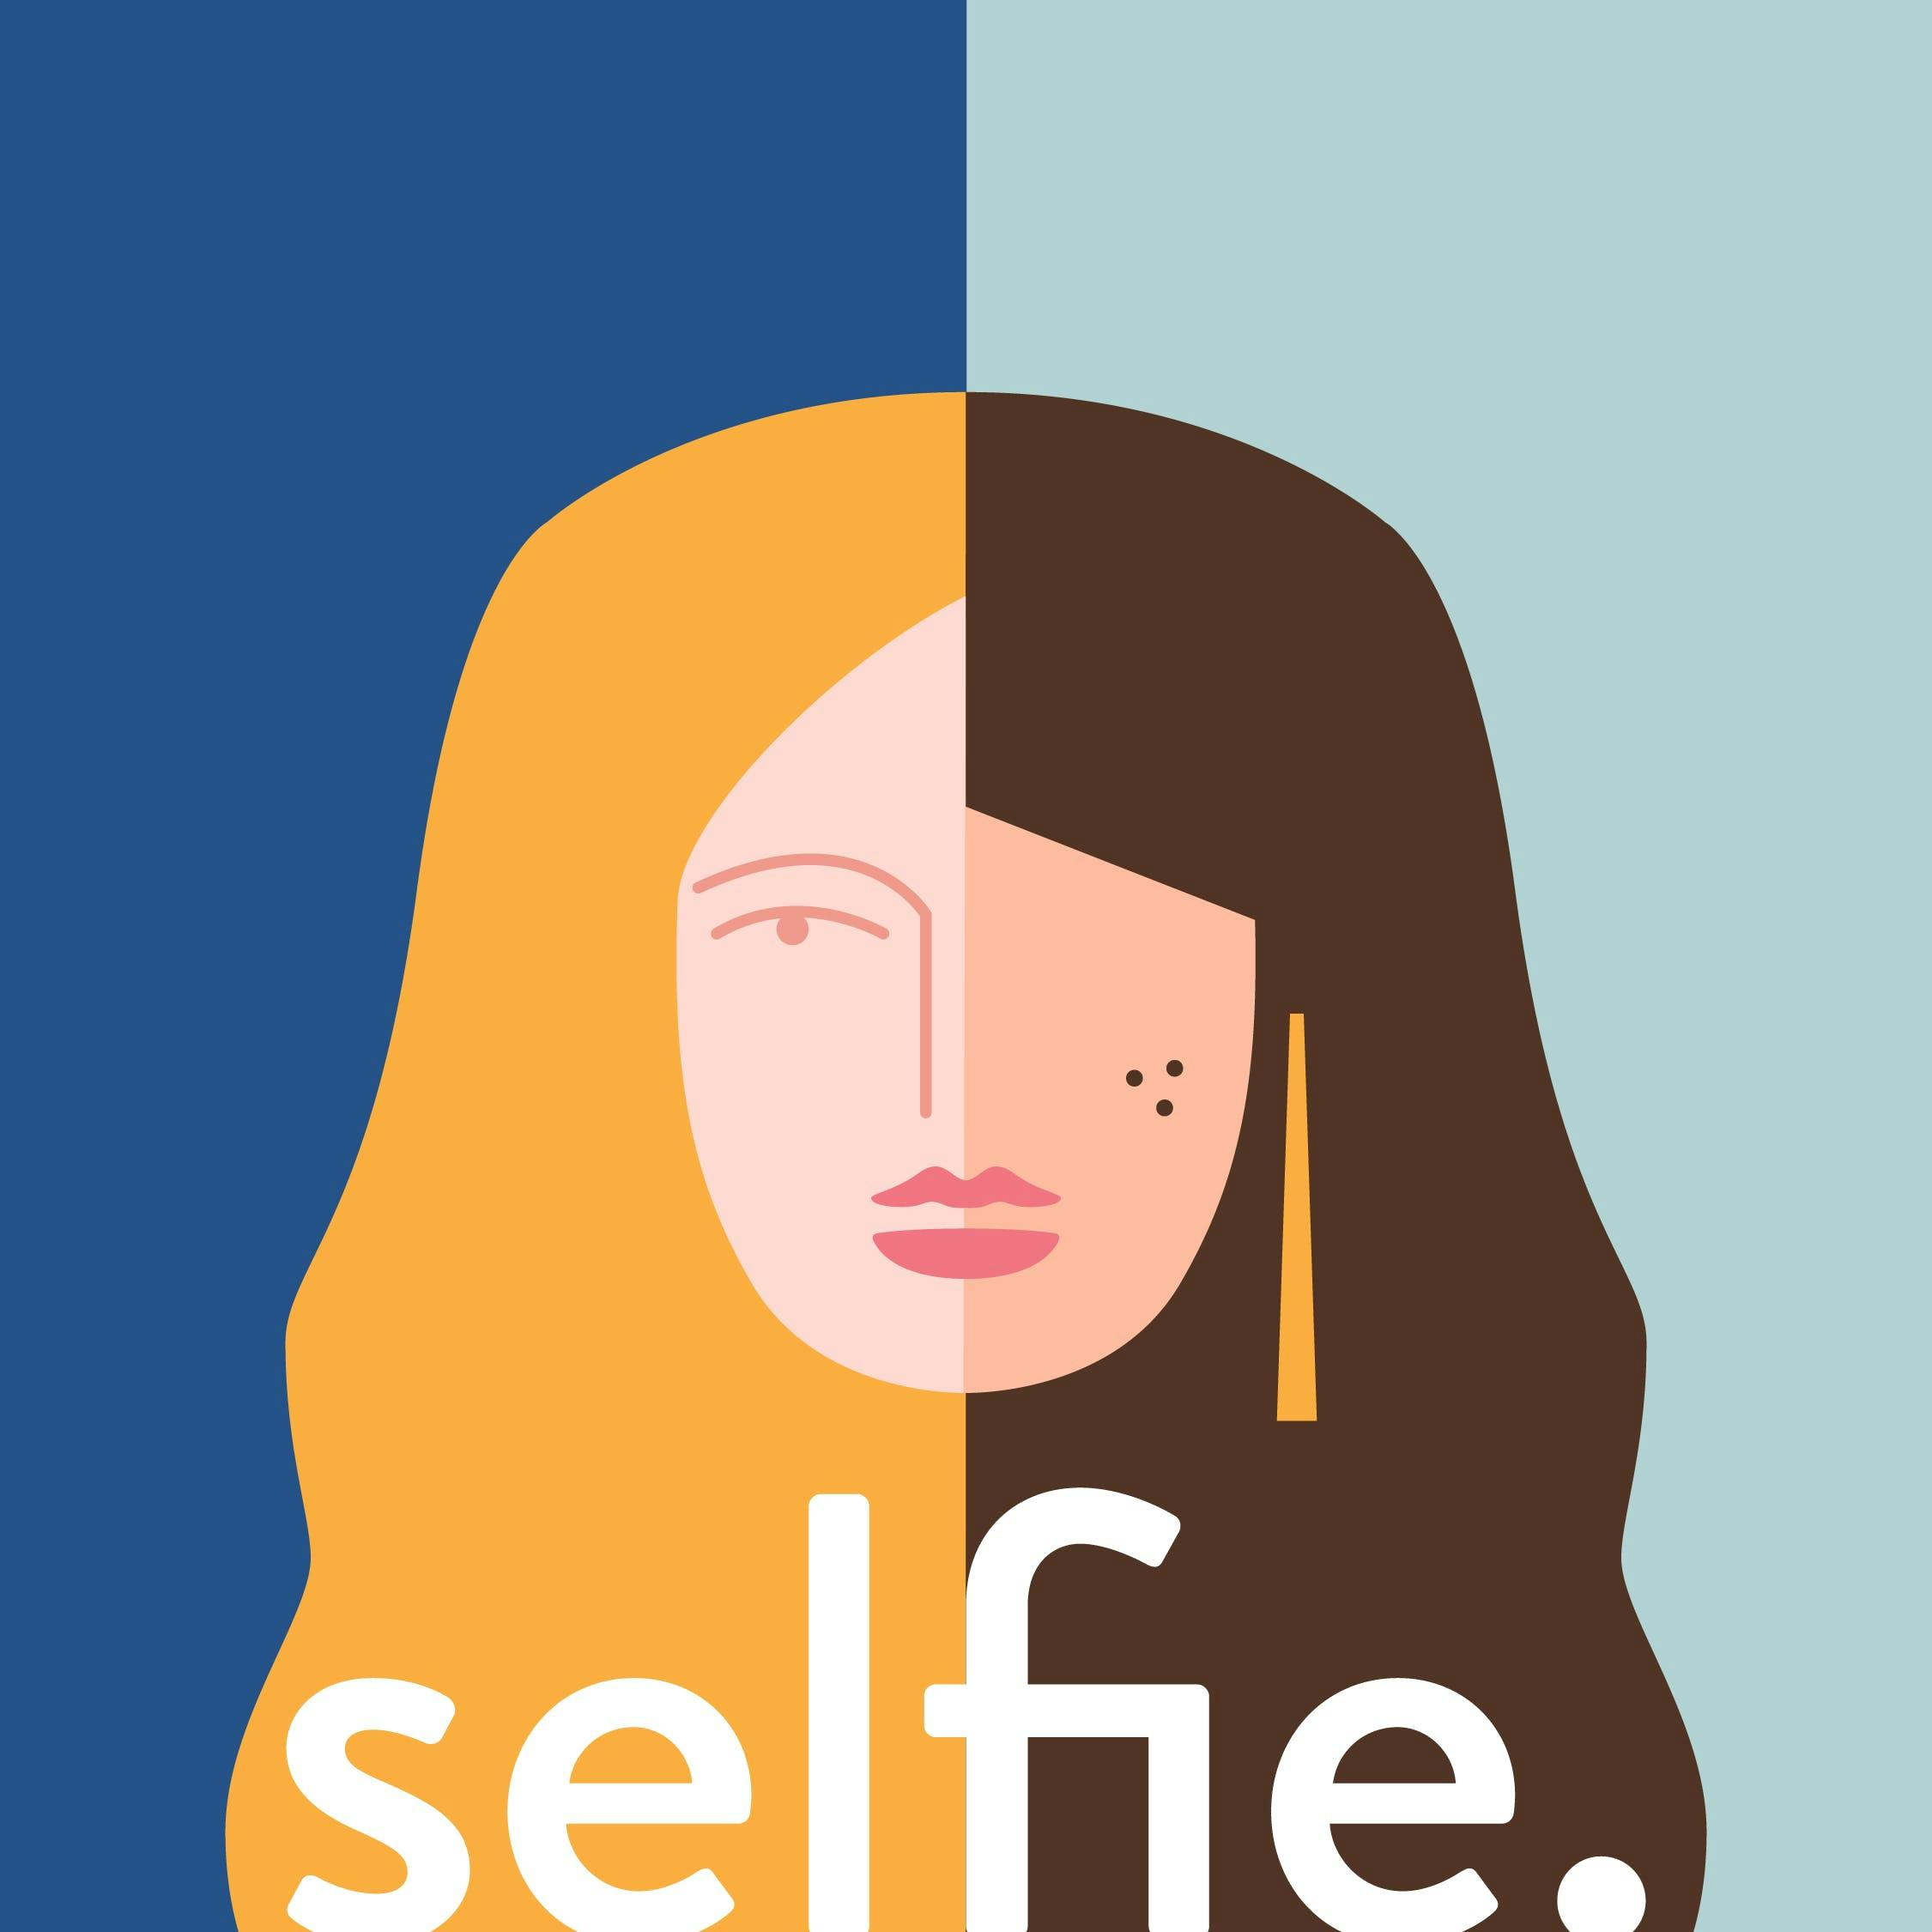 Processing an Insurrection: Self-Care While Staying Aware | Selfie Podcast Episode 156